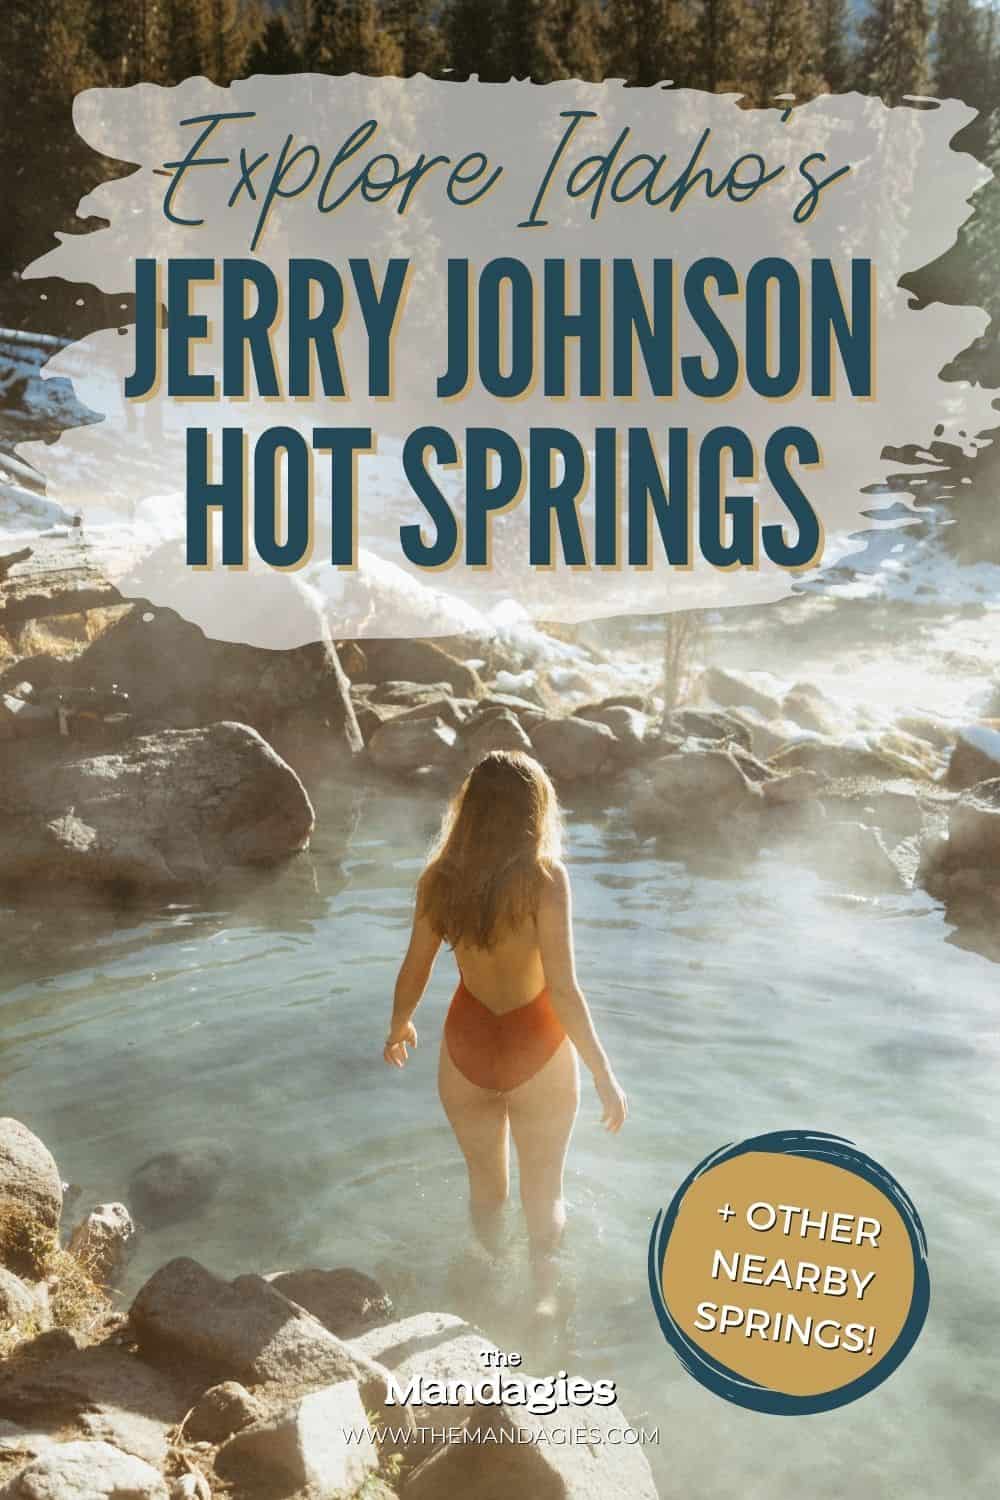 Jerry Johnson Hot Springs in Central Idaho is one of the coolest hot springs in Idaho! We're sharing how to get to the Lolo Pass area, what to pack for your hot springs day hike, and nearby hot springs near Missoula and North Idaho. Save this post for your next beautiful Idaho road trip! #westcoast #roadtrip #americanroadtrip #idaho #PNW #hotsprings #idahohotsprings #mountains #lolopass #missoula